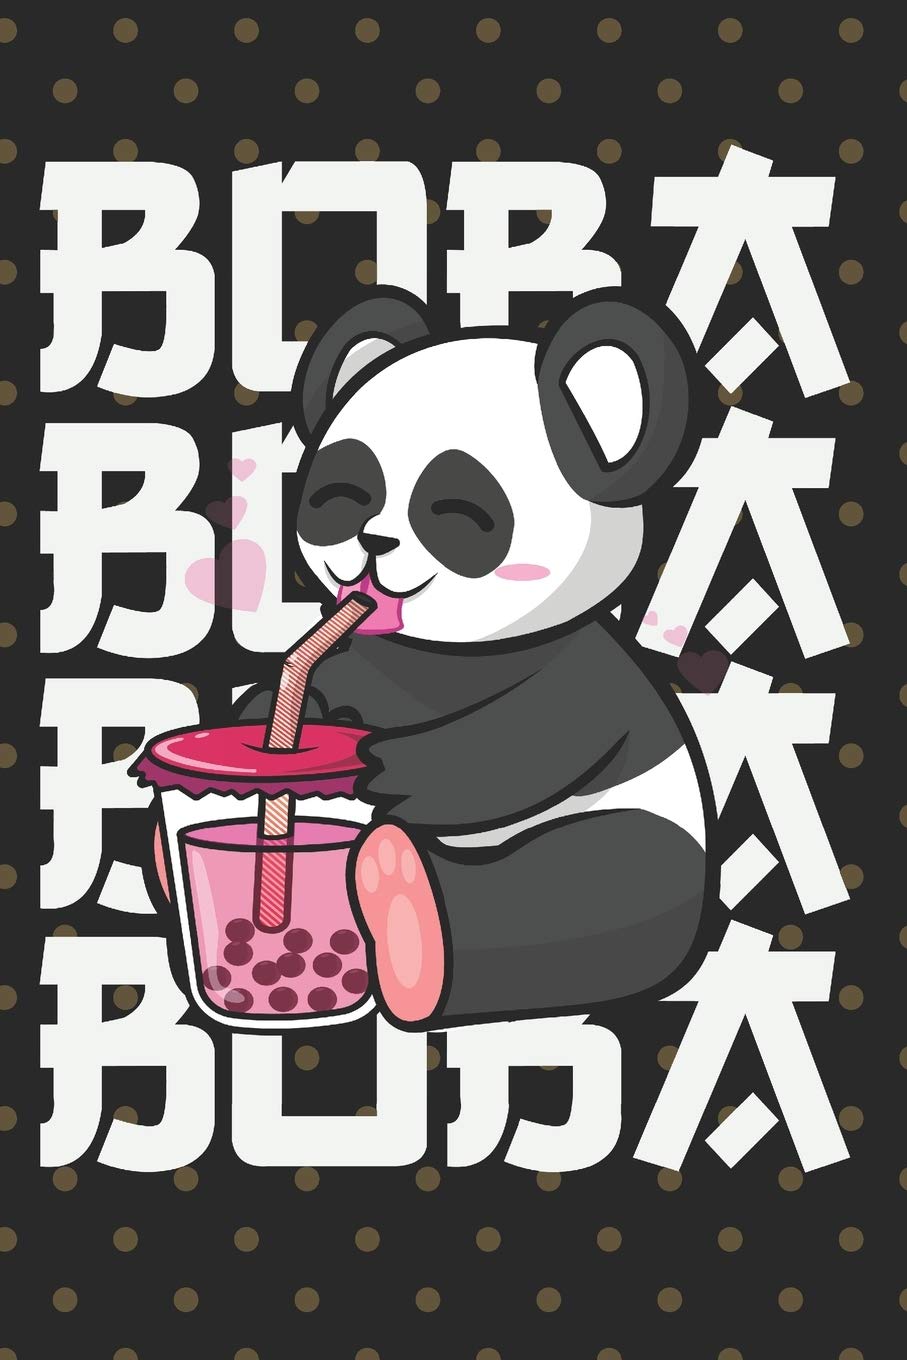 Buy Kawaii Bubble Tea Panda Boba: Cute Blank Notebook for Sketching Unlined Paper Book for Drawing, Journaling, and Doodling, Perfect for Creative Kids, and adults Book Online at Low Prices in India